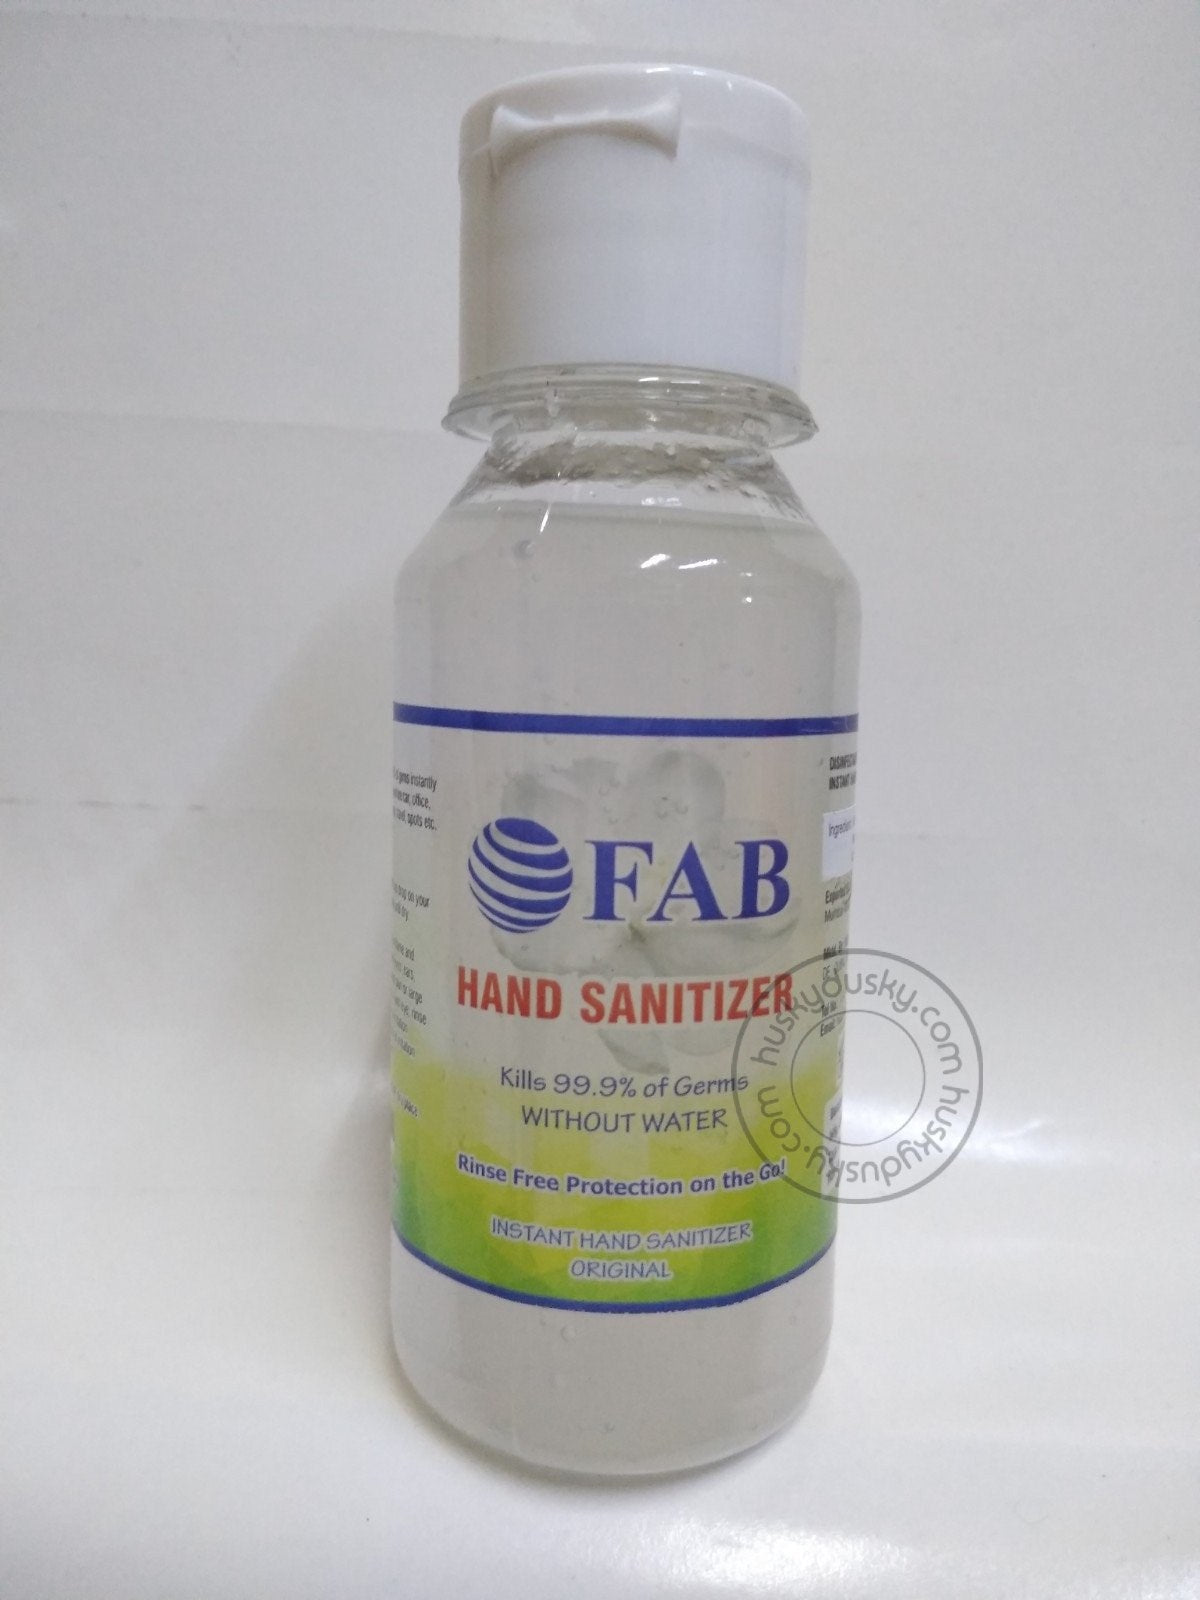 FAB HAND SANITIZER For Protection Skin Care Alcohol Based Killed 99.99 Germs Hand Rub 100ML SAN-Pack Of 10